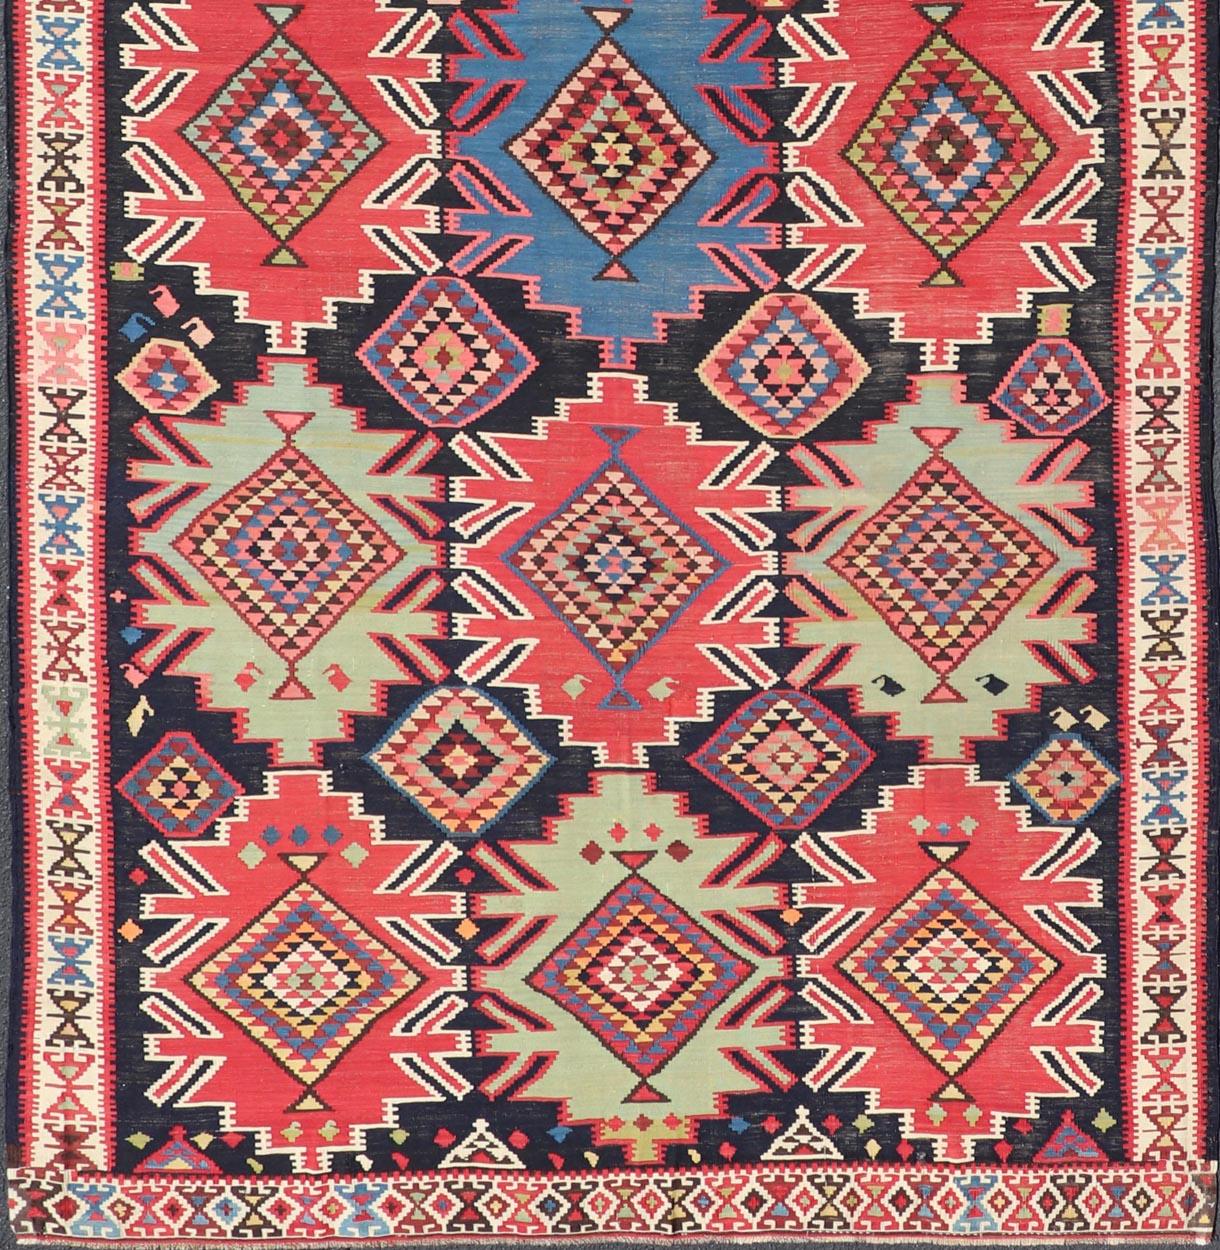 Hand-Woven 19th Century Antique Kuba Kilim Gallery Rug in with Vibrant Colors For Sale